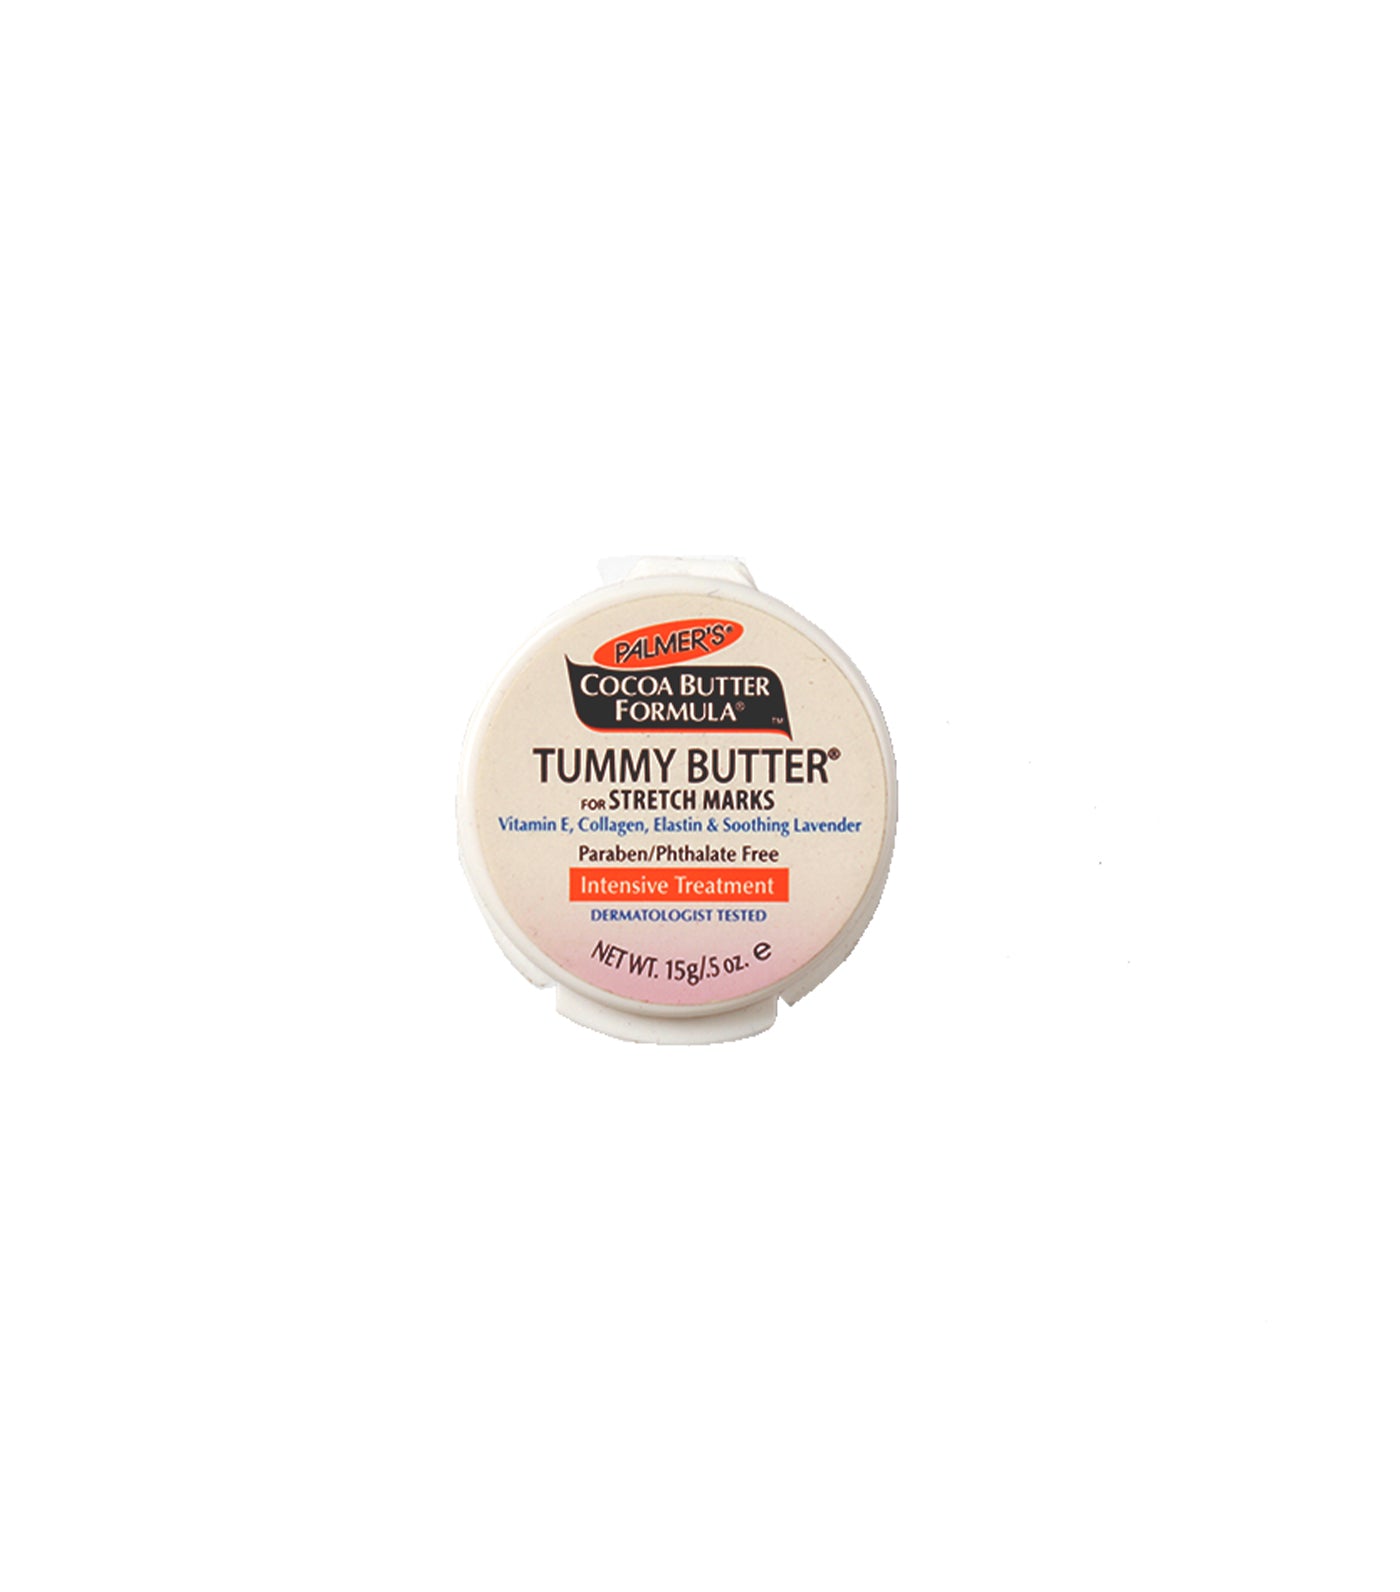 Free Tummy Butter for Stretch Marks 15g